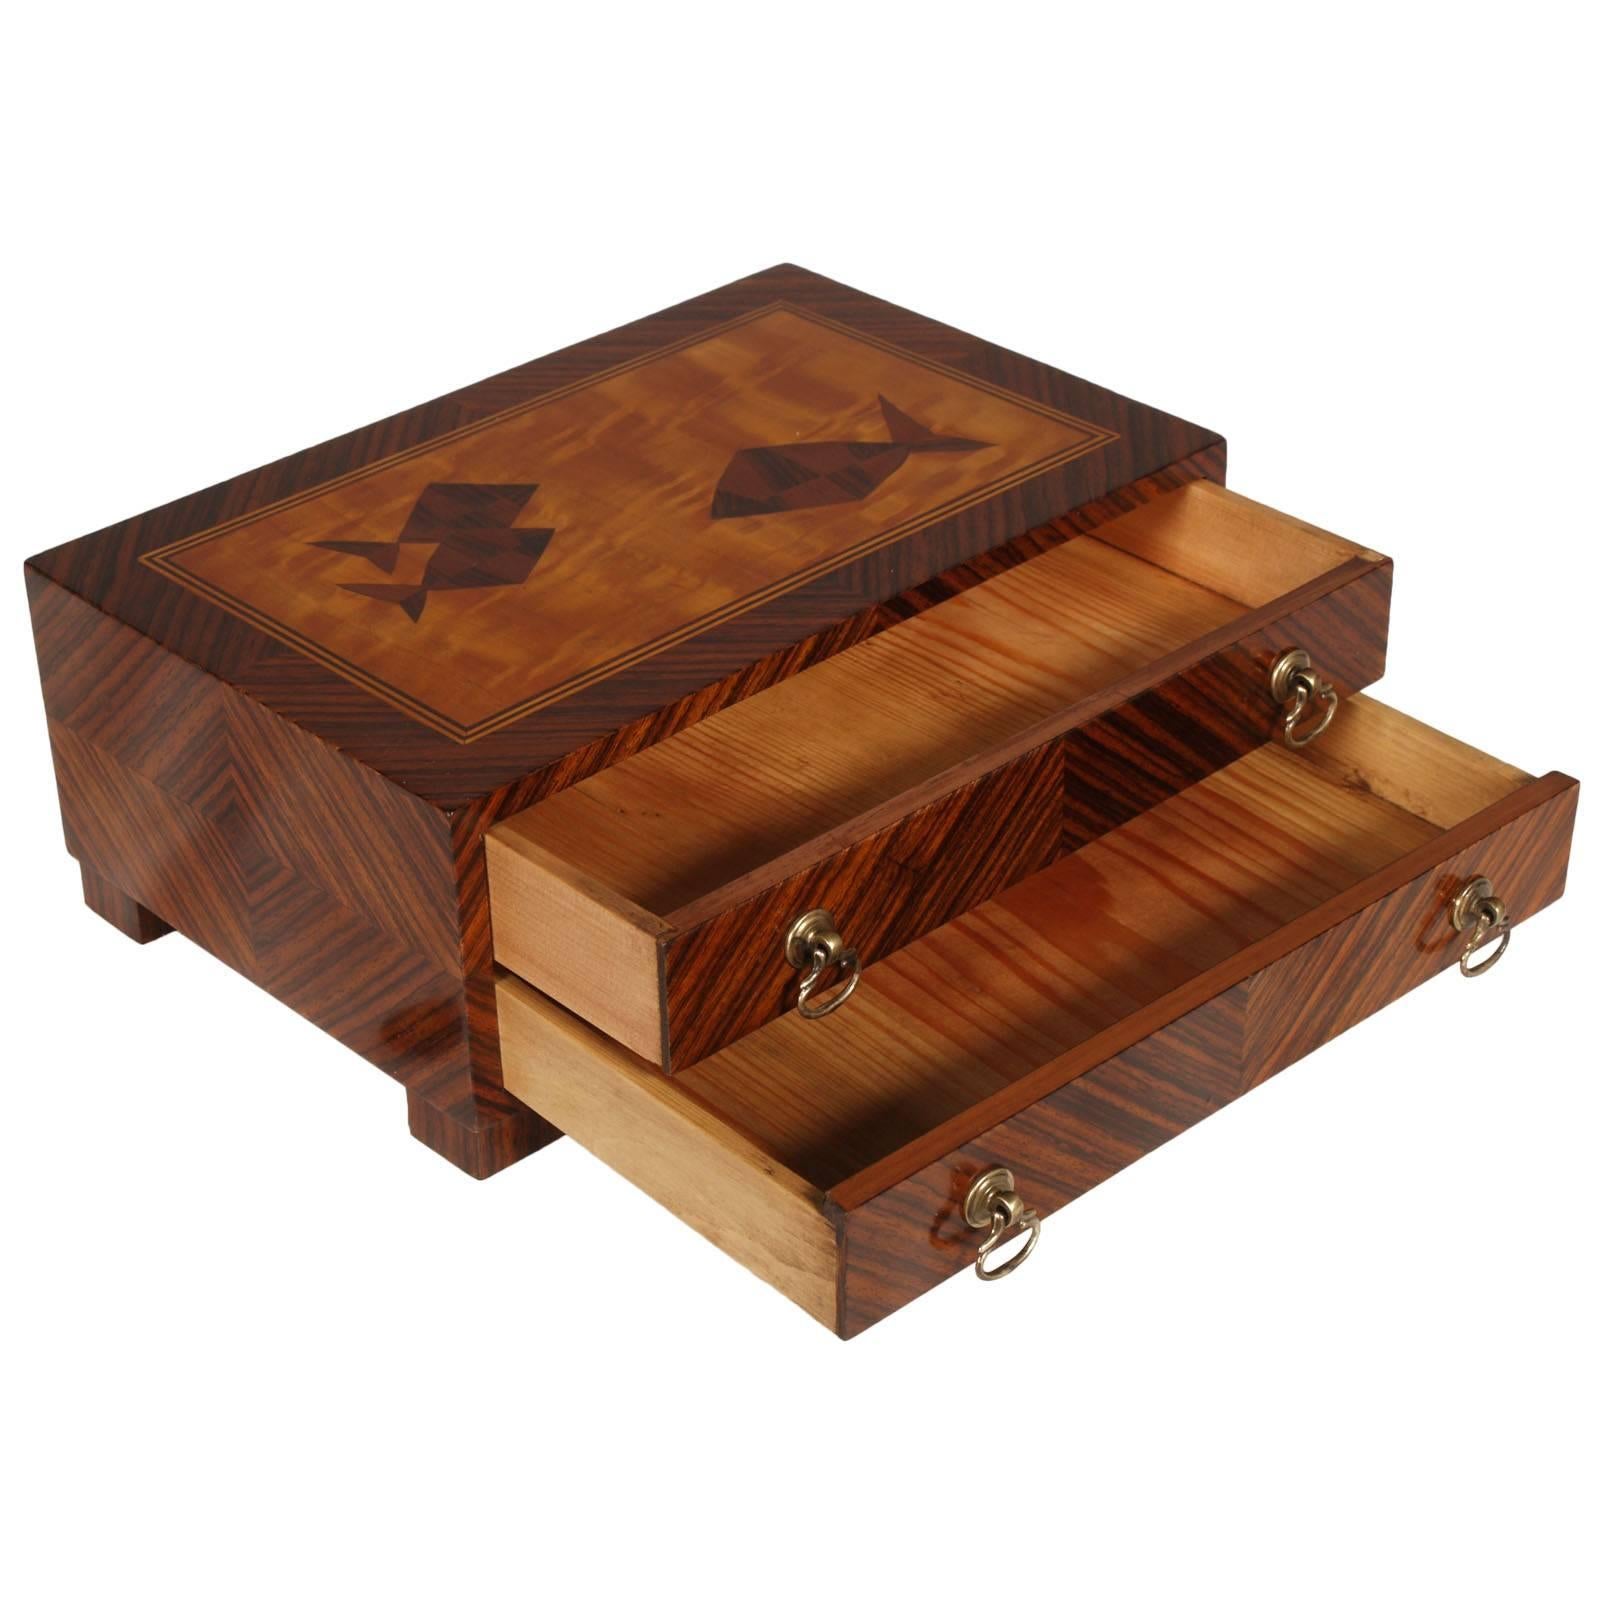 Code: FT02
Macassar ebony veneered jewelry box with precious rosewood striped herringbone, two drawers with brass handles. Top with maple veneer inlay figures.

Measure in cm H 12, L 30, P 19 in inches H 4.80, L 12.00                         , D